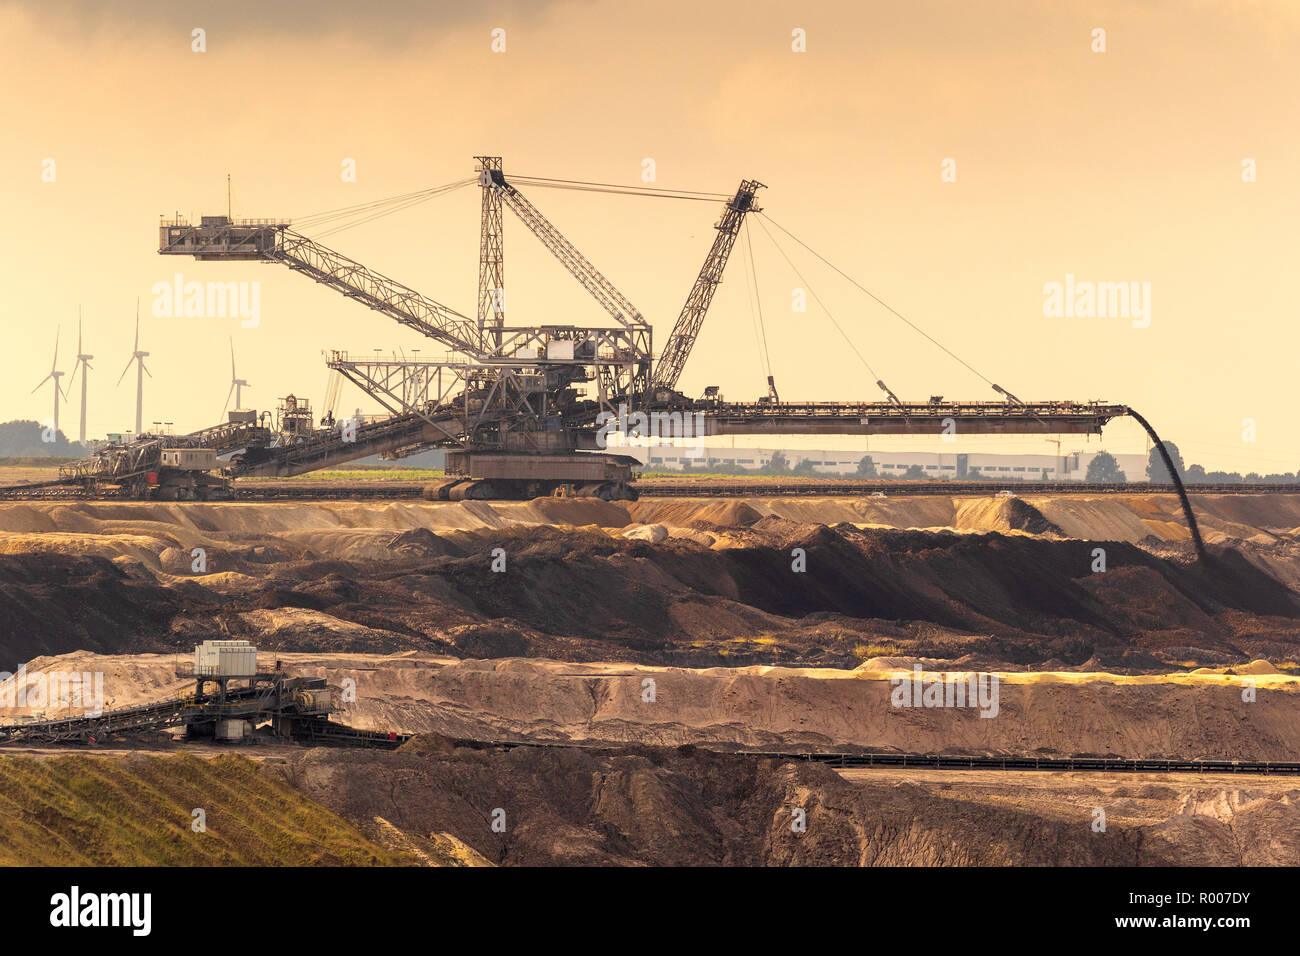 Mining equipment in a Brown Coal Open Pit Mine. Stock Photo